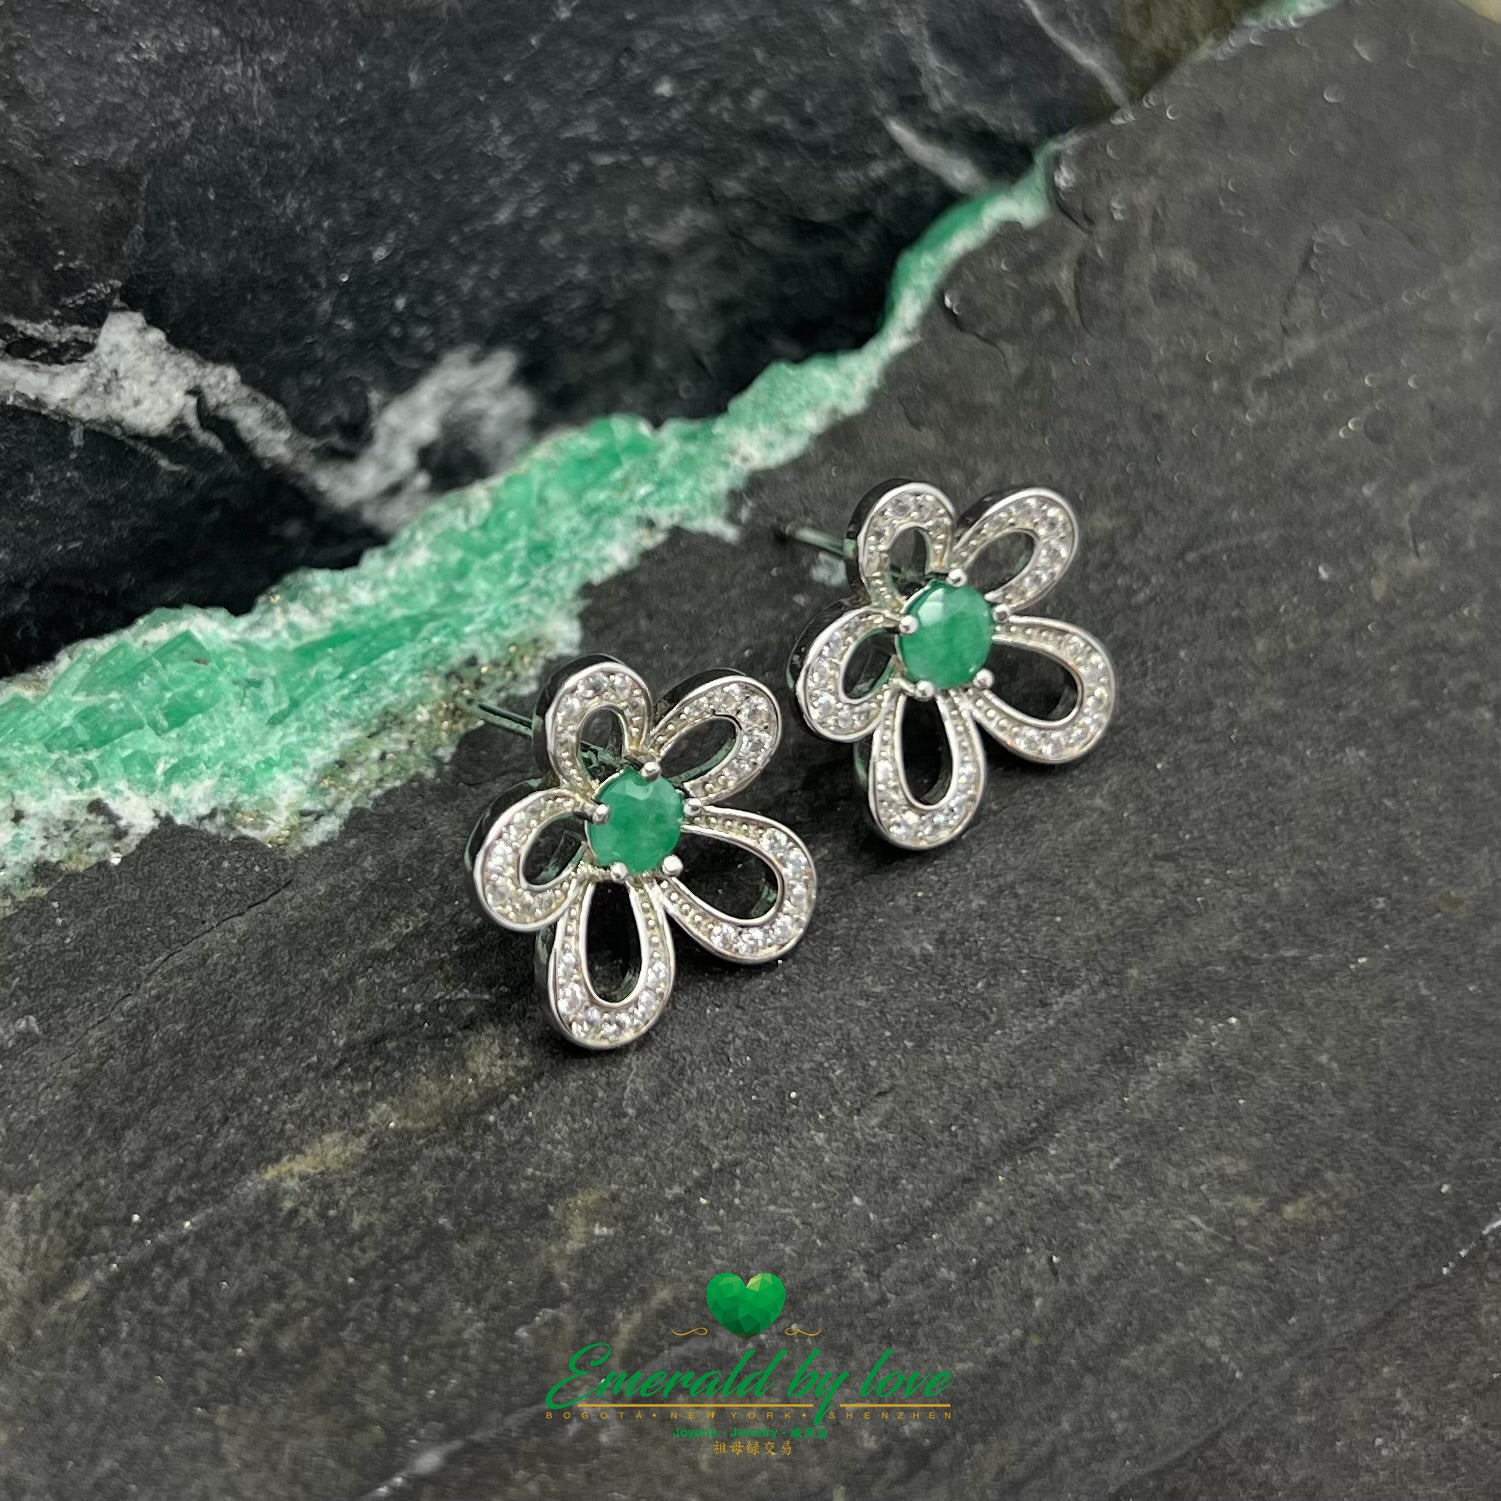 Medium flower-Shaped Sterling Silver Earrings with Central Round Emerald